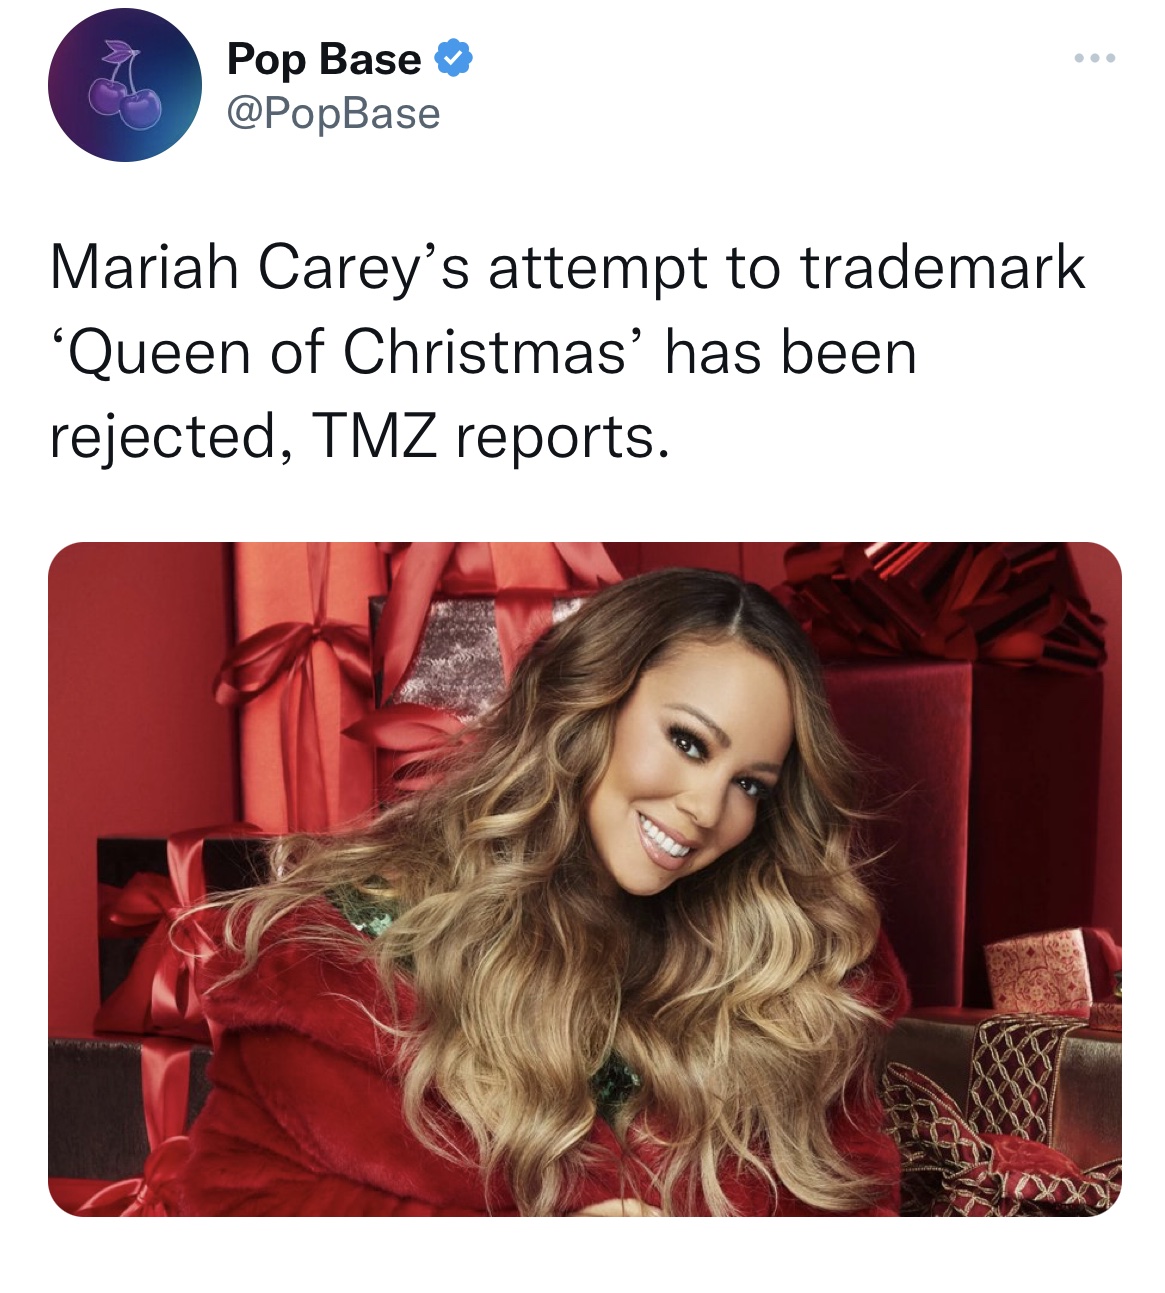 Tweets dunking on celebs - mariah carey christmas special - Pop Base ... Mariah Carey's attempt to trademark 'Queen of Christmas' has been rejected, Tmz reports.